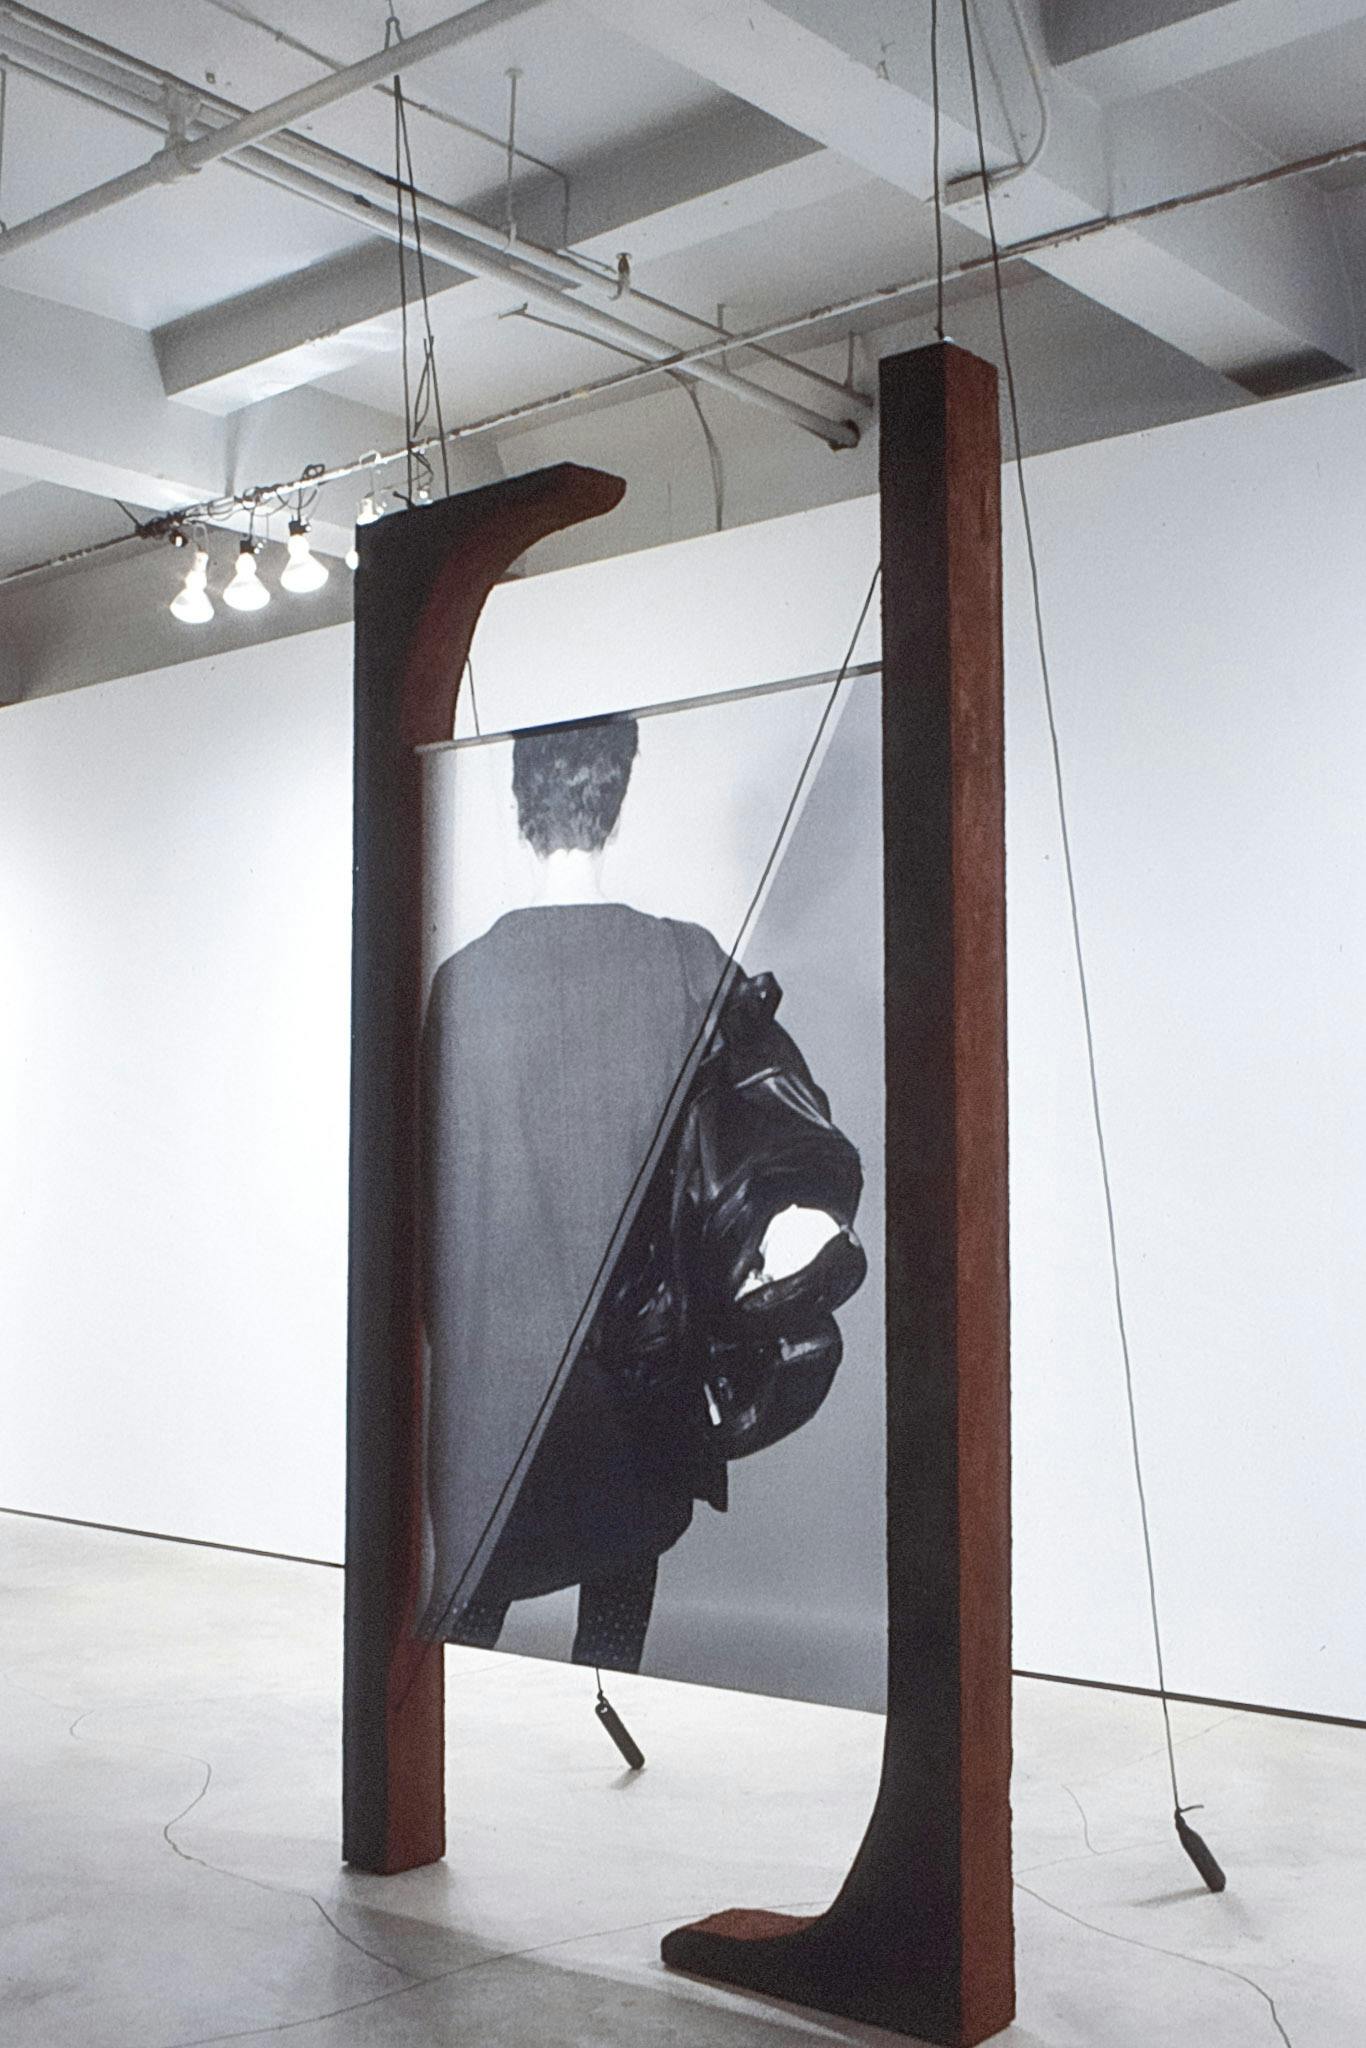 A large photo stretched between two wood beams. The beams have a slightly curved foot to them, resembling a serif on the letter "N." The structure has cables that hang from the ceiling attached to it.